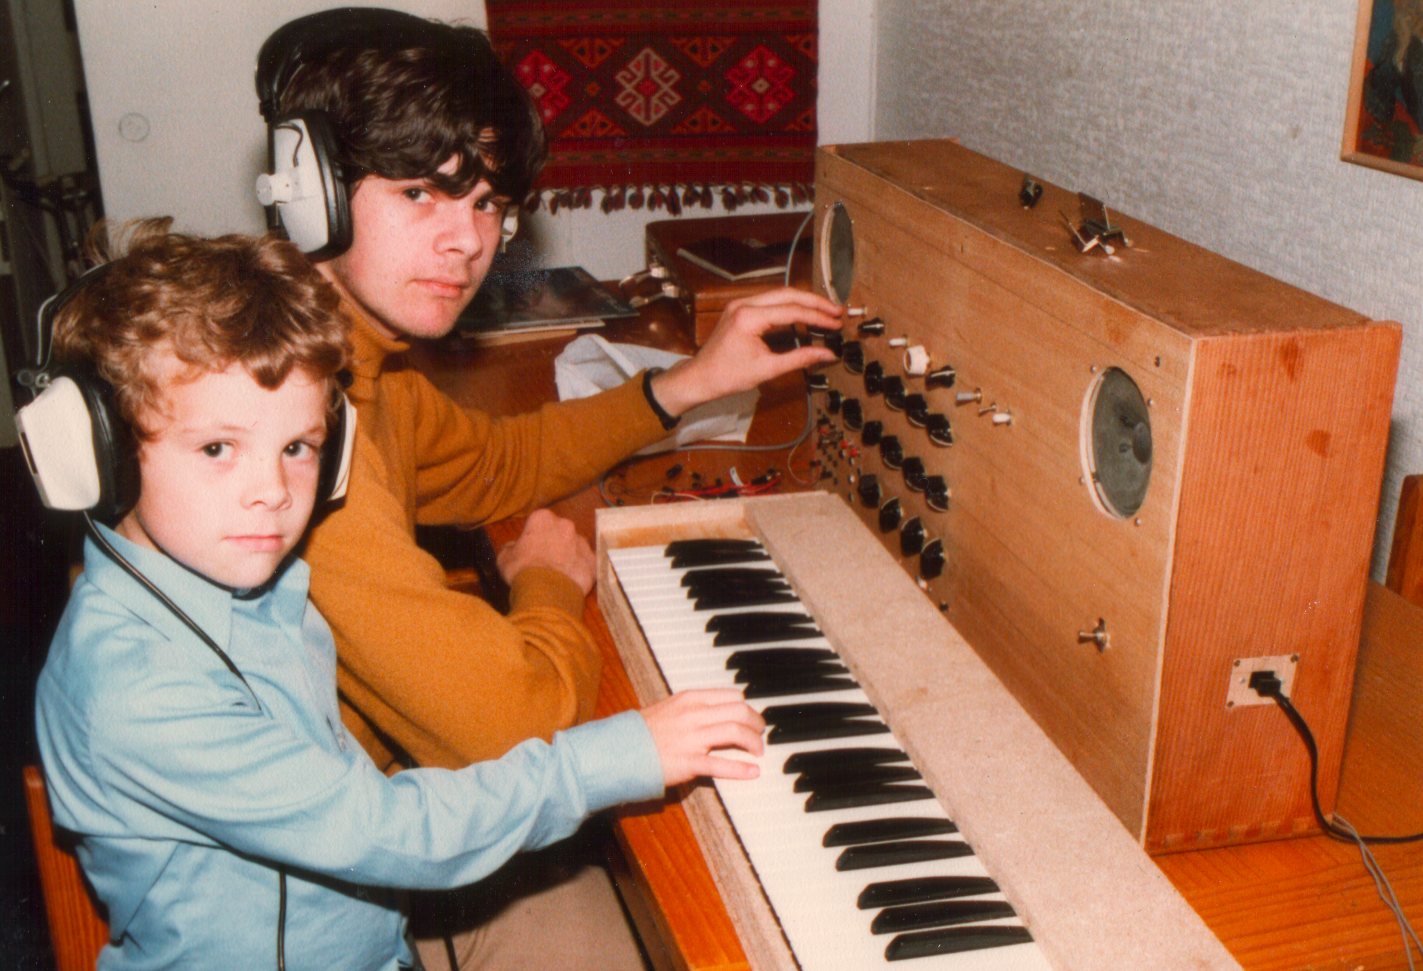 youth photo with vintage synth